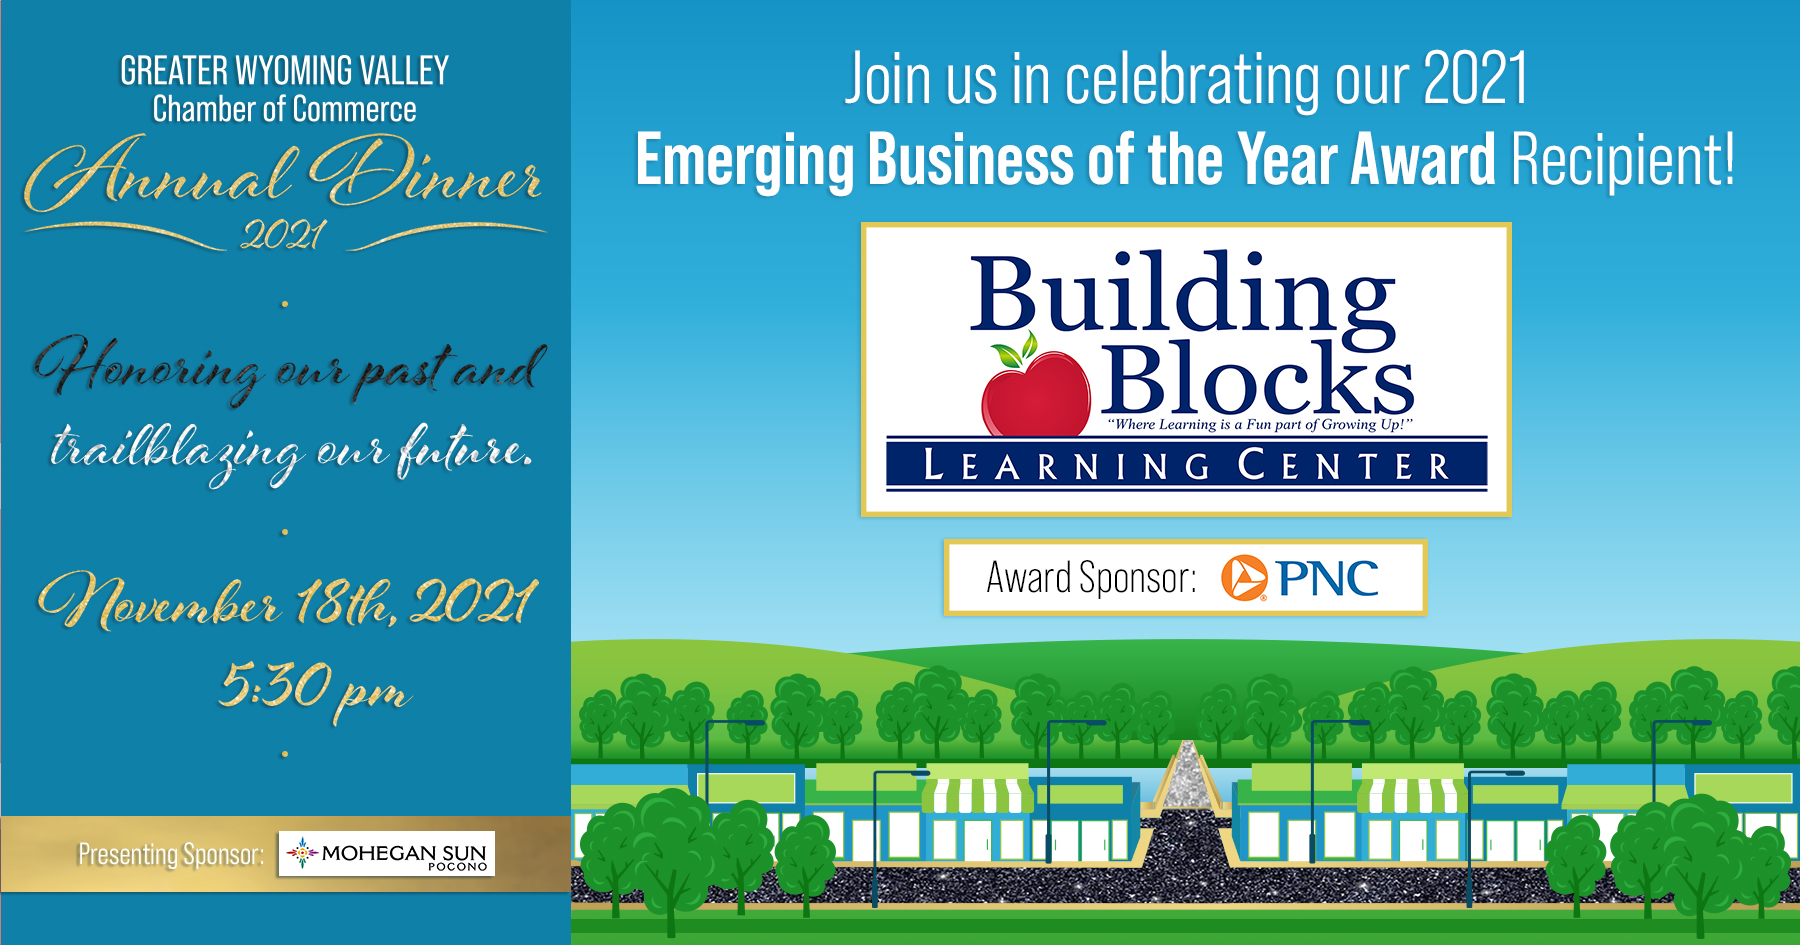 Image for Meet Our 2021 Emerging Business of the Year Award Recipient: Building Blocks Learning Center!